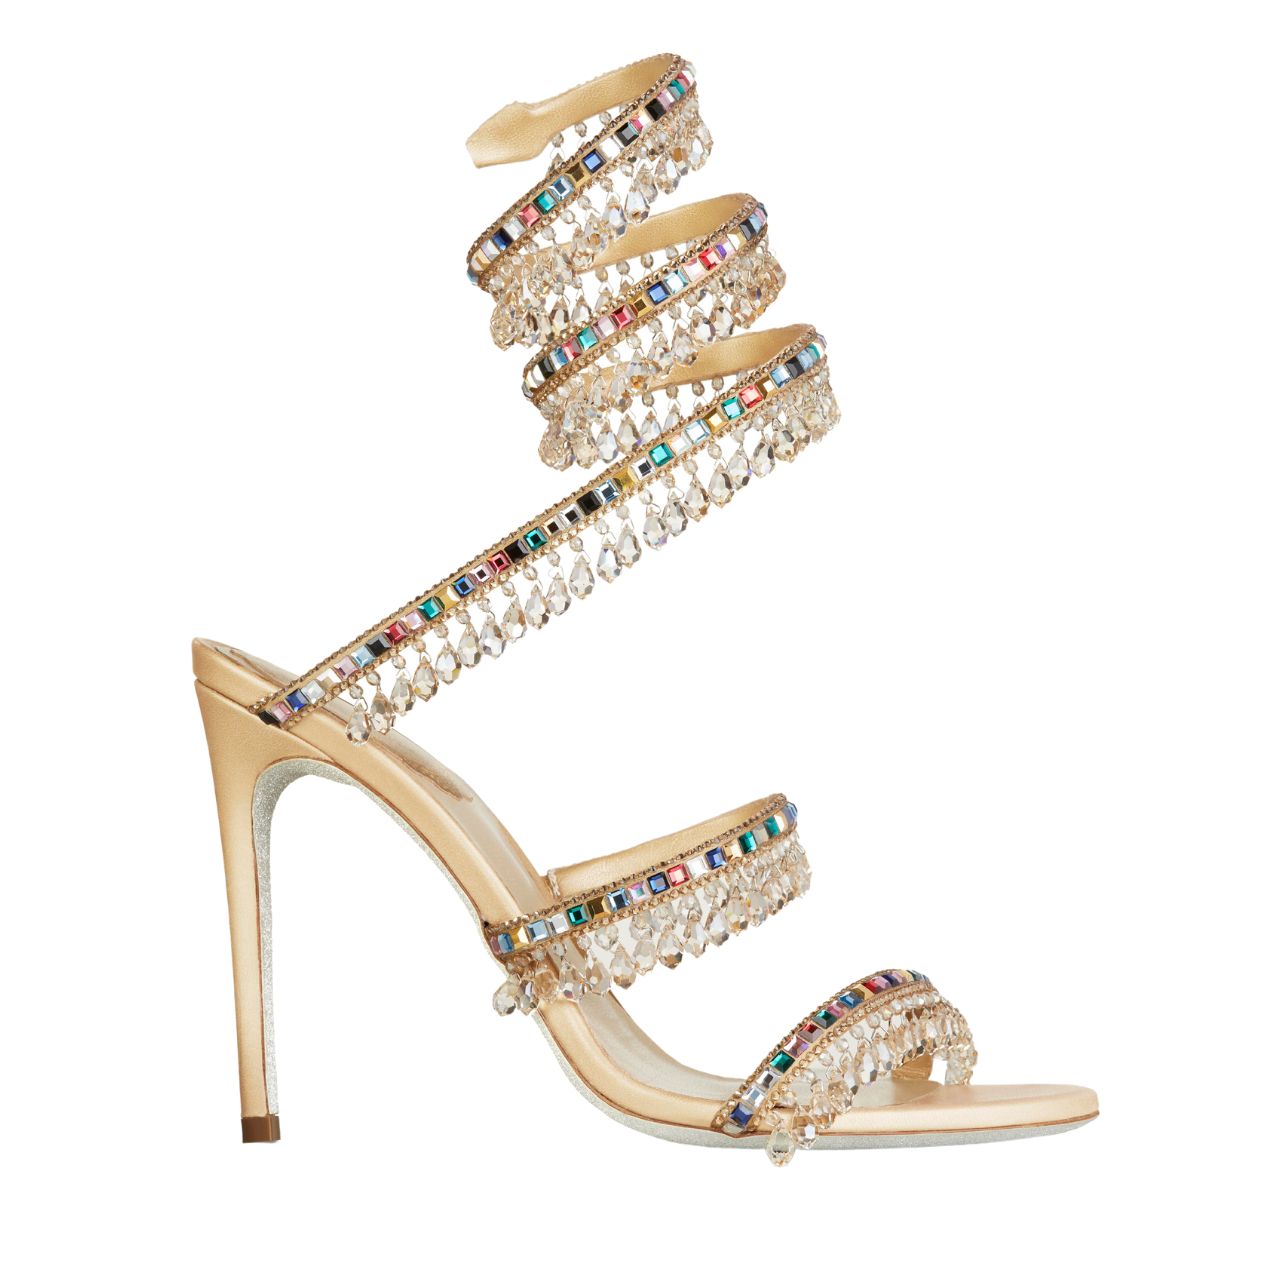 René Caovilla wrap around Cleo sandal with multicolor stones and chandelier style beads